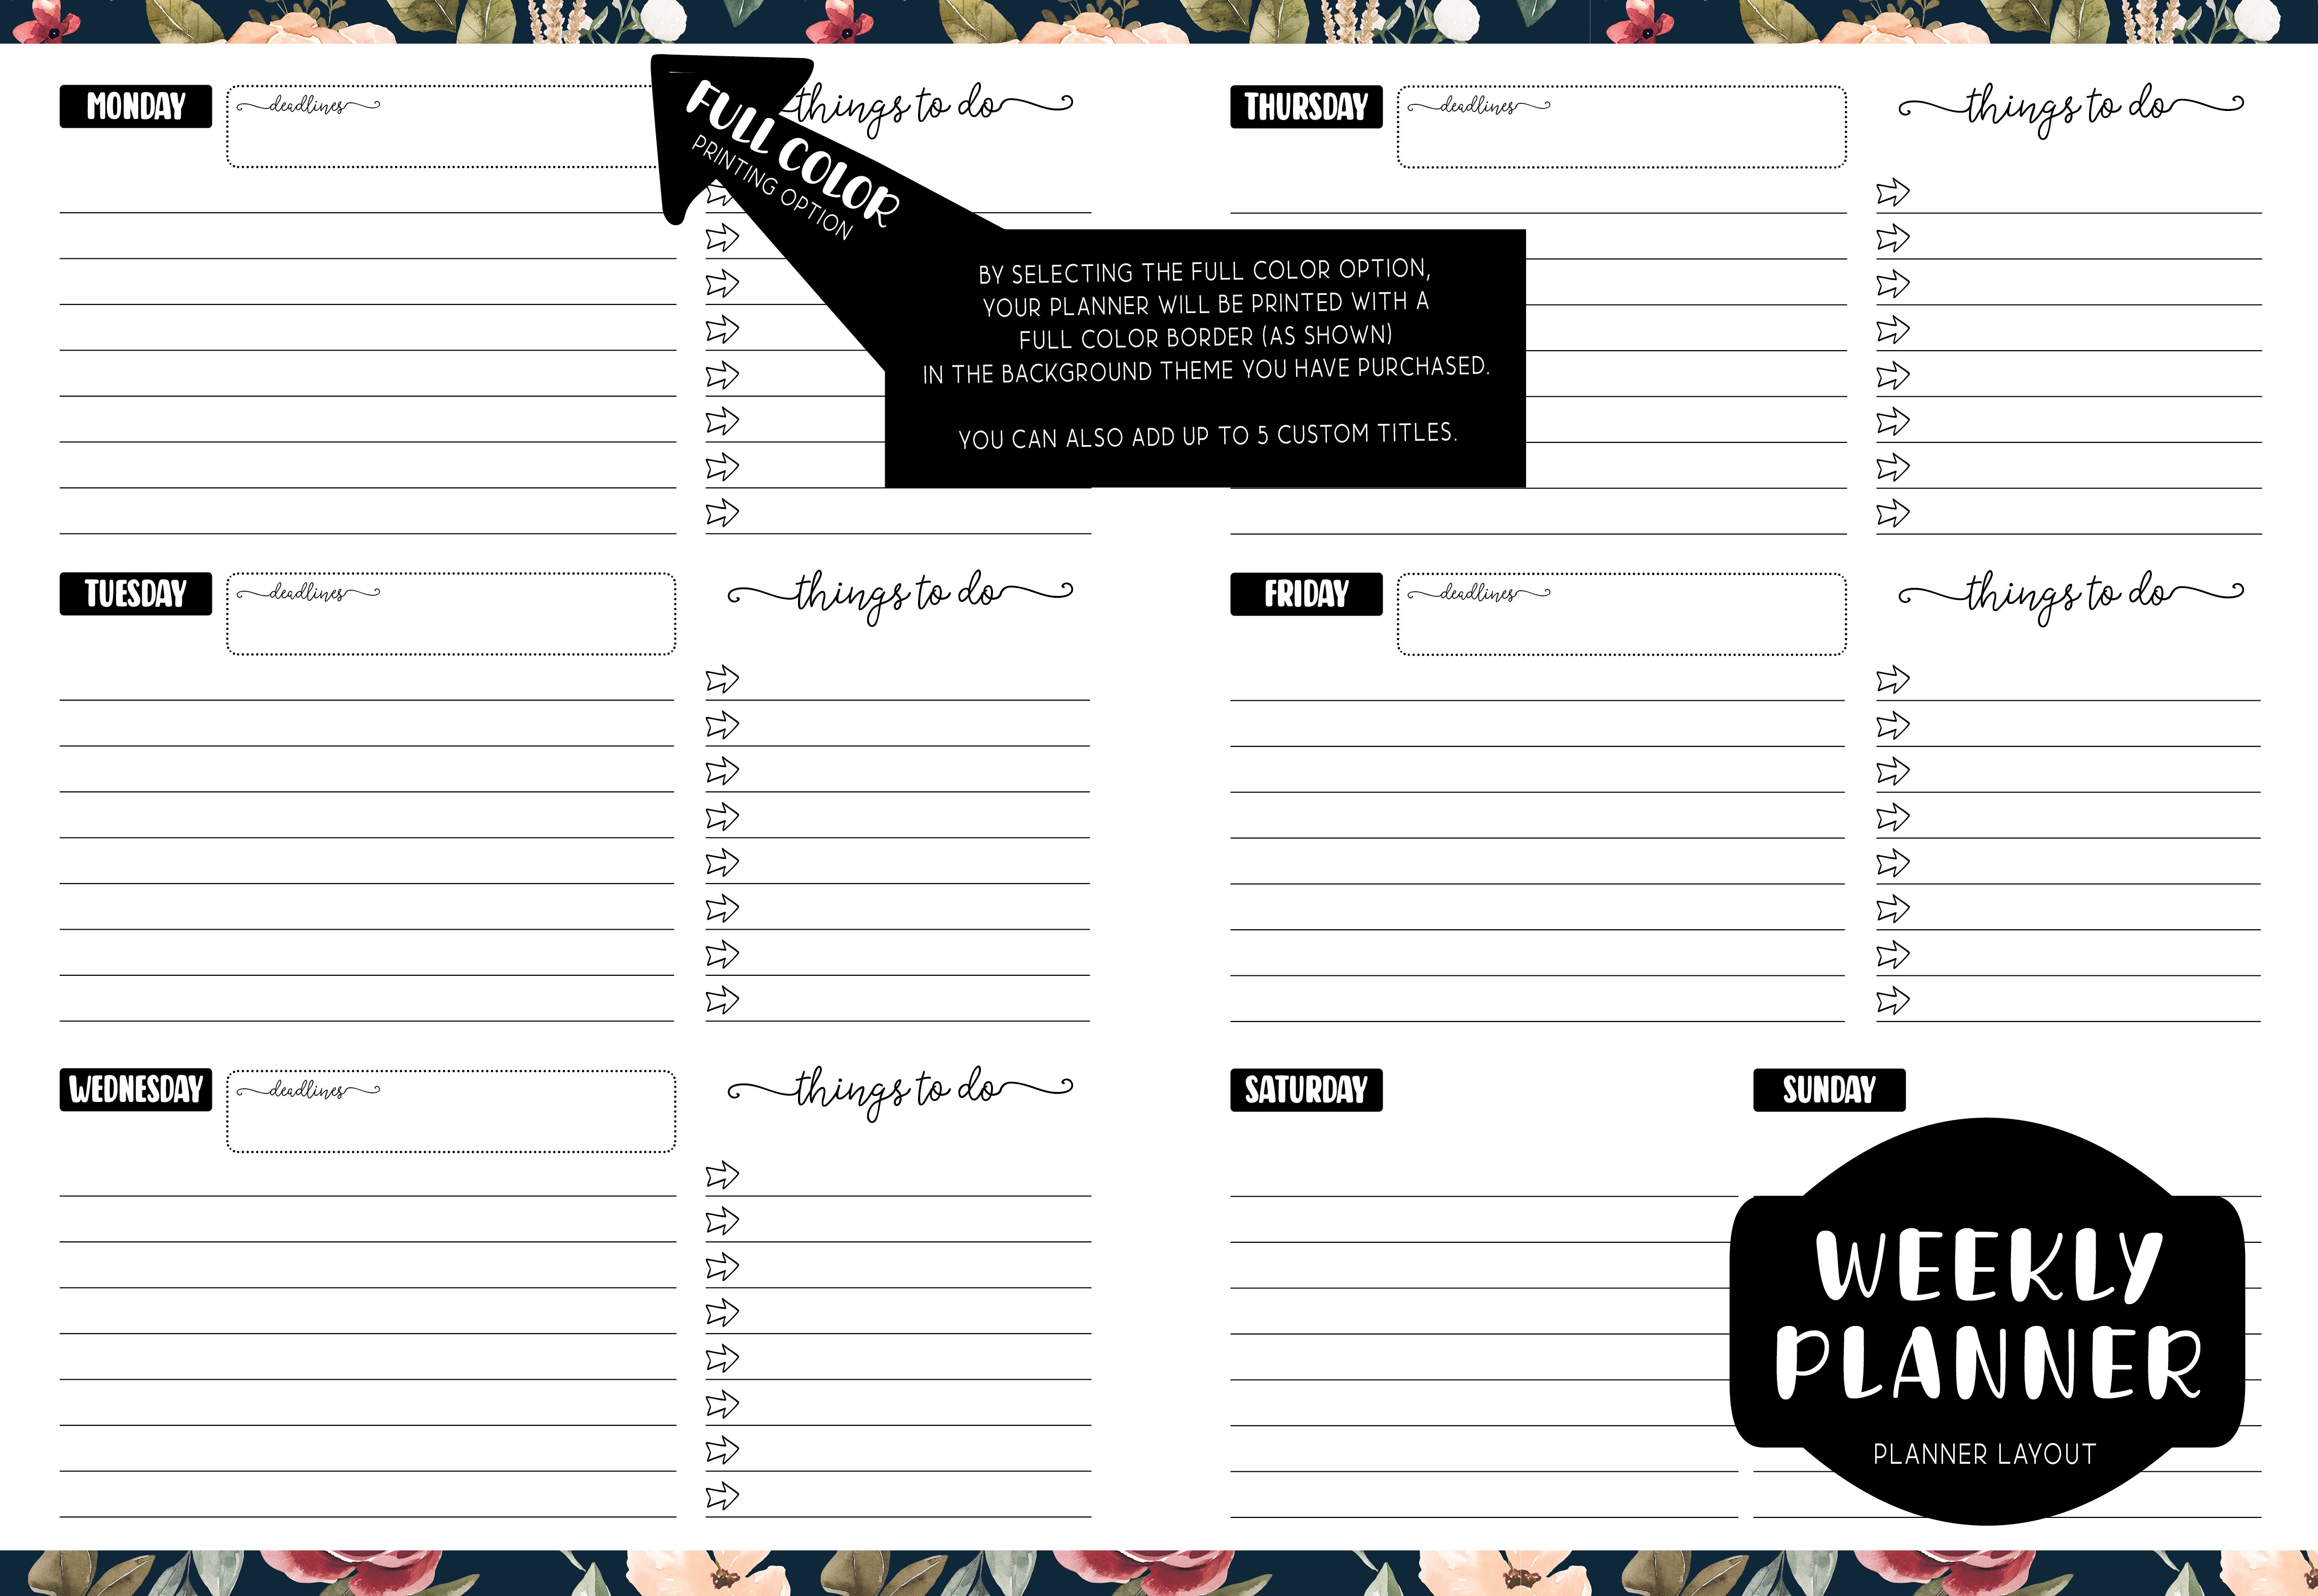 Weekly Planner - AUTUMN NAVY FLORAL